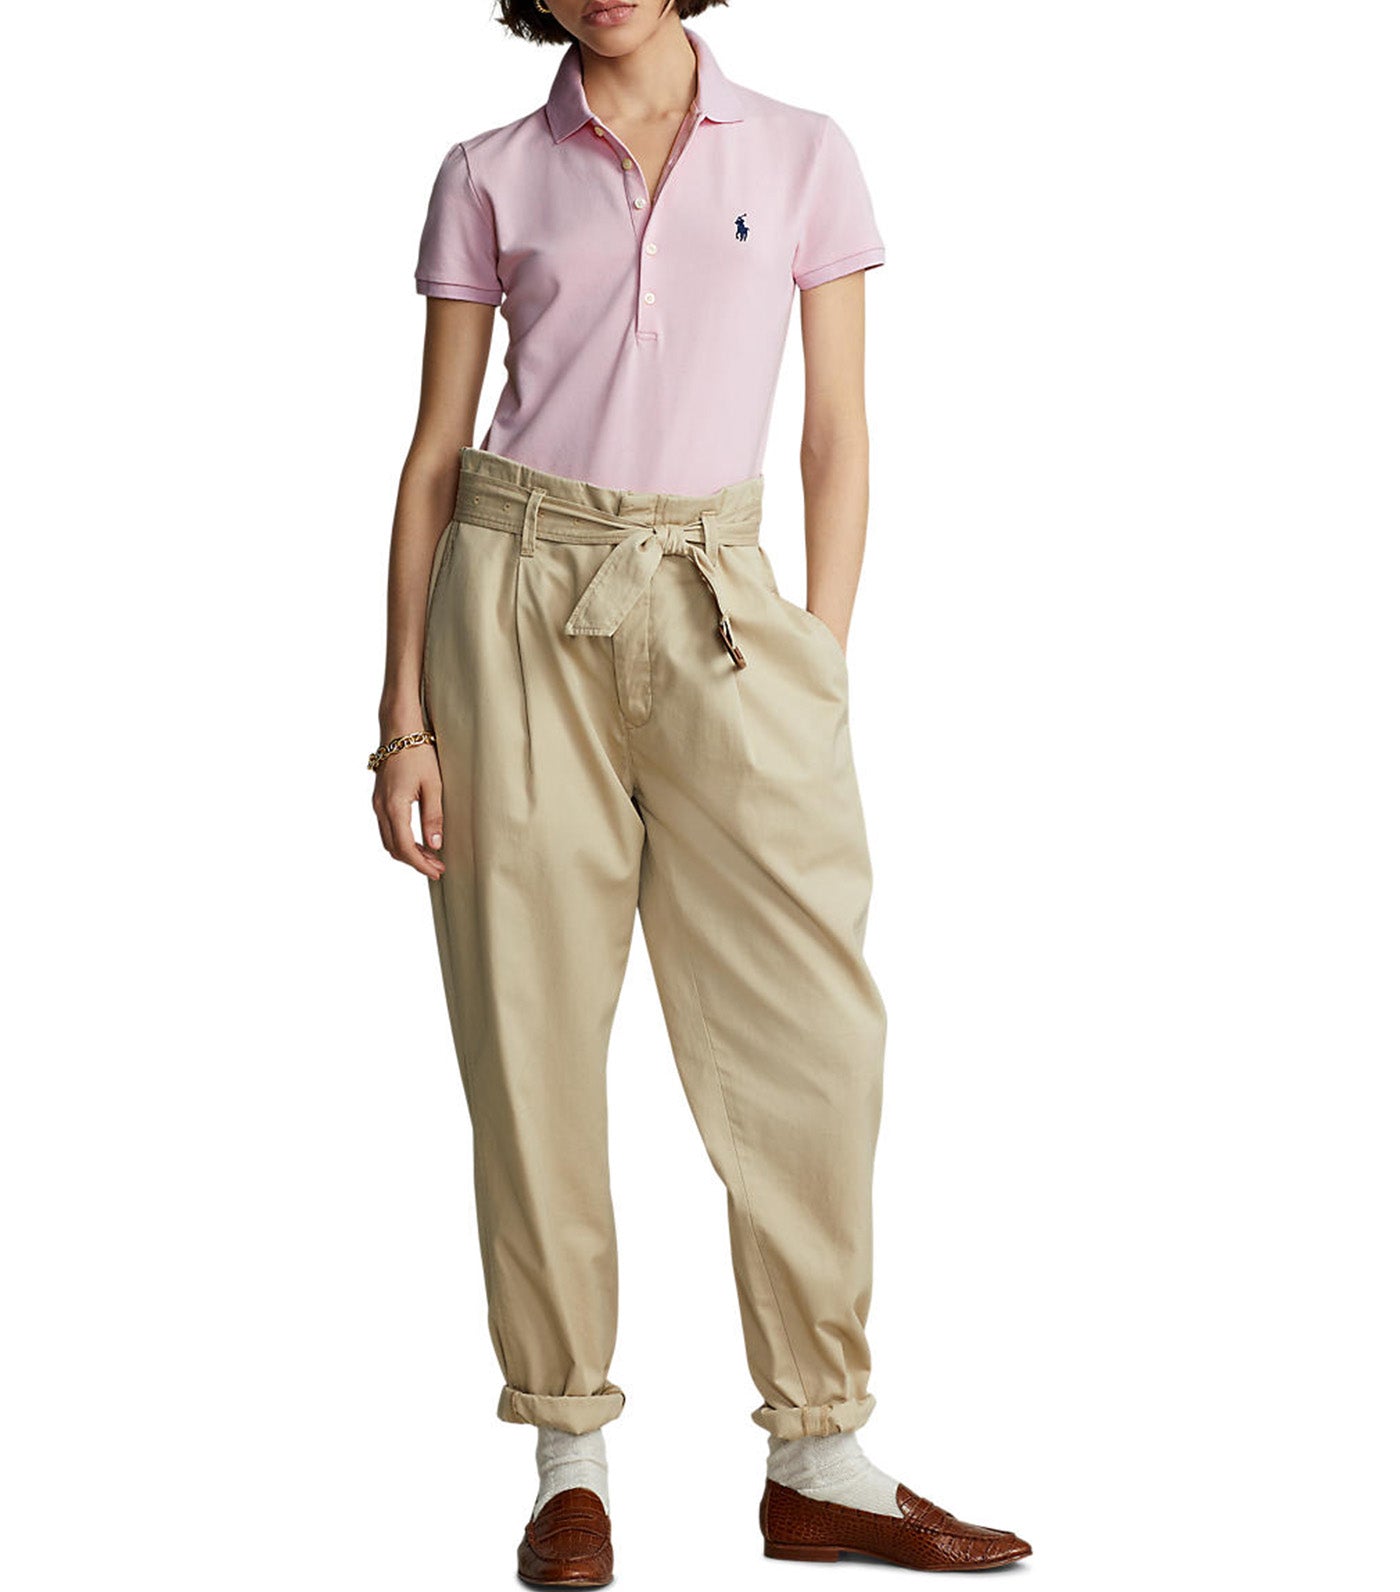 Buy Polo Ralph Lauren Pants | Clothing Online | THE ICONIC